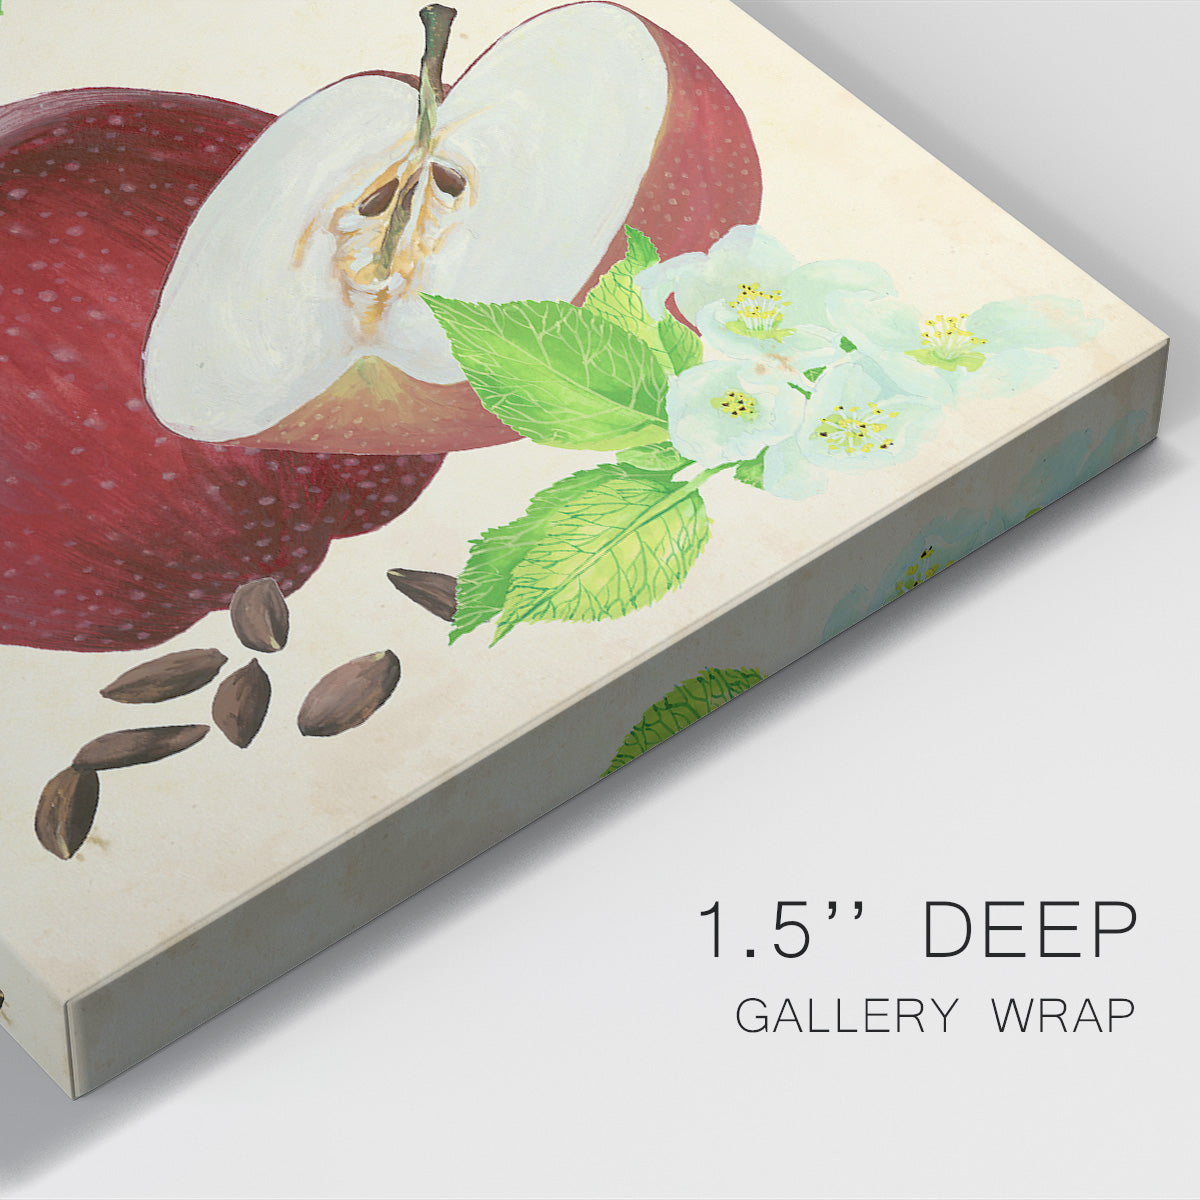 Apple & Blossom Study I Premium Gallery Wrapped Canvas - Ready to Hang